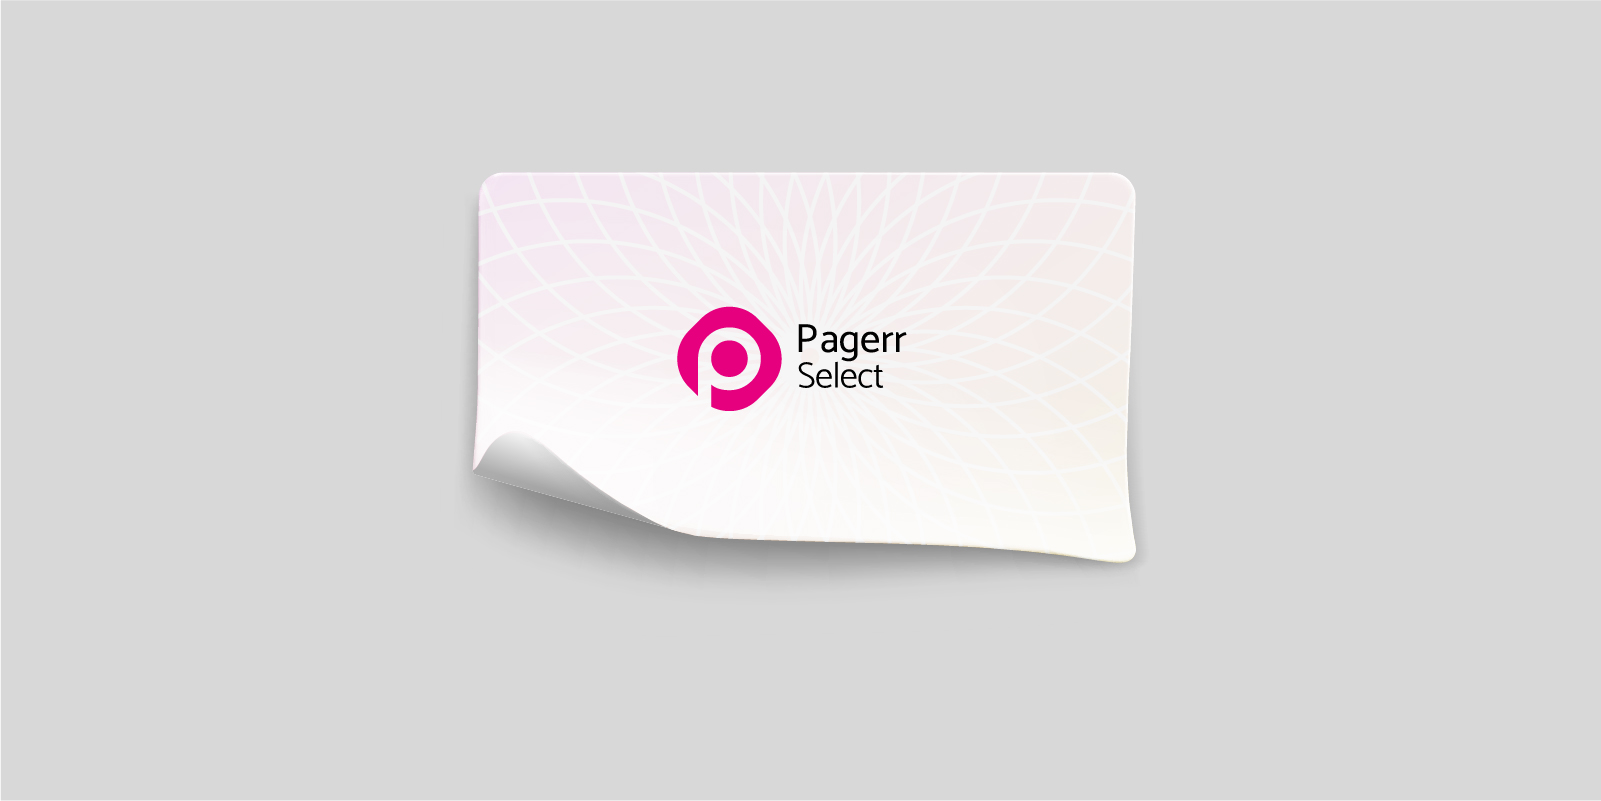 Sheet stickers in Berlin - Print with Pagerr